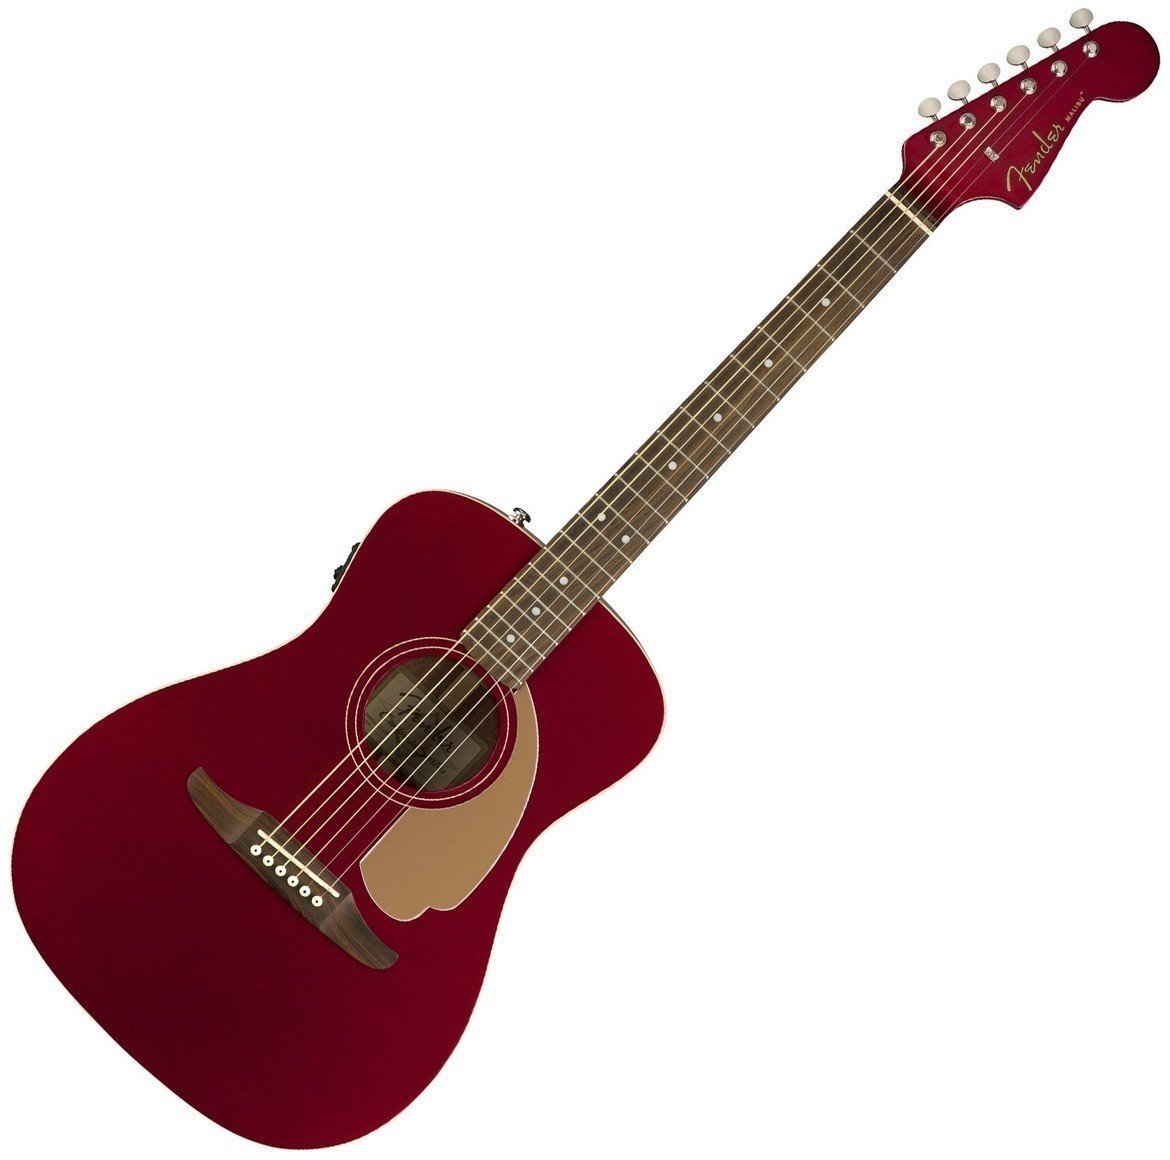 Electro-acoustic guitar Fender Malibu Player Candy Apple Red